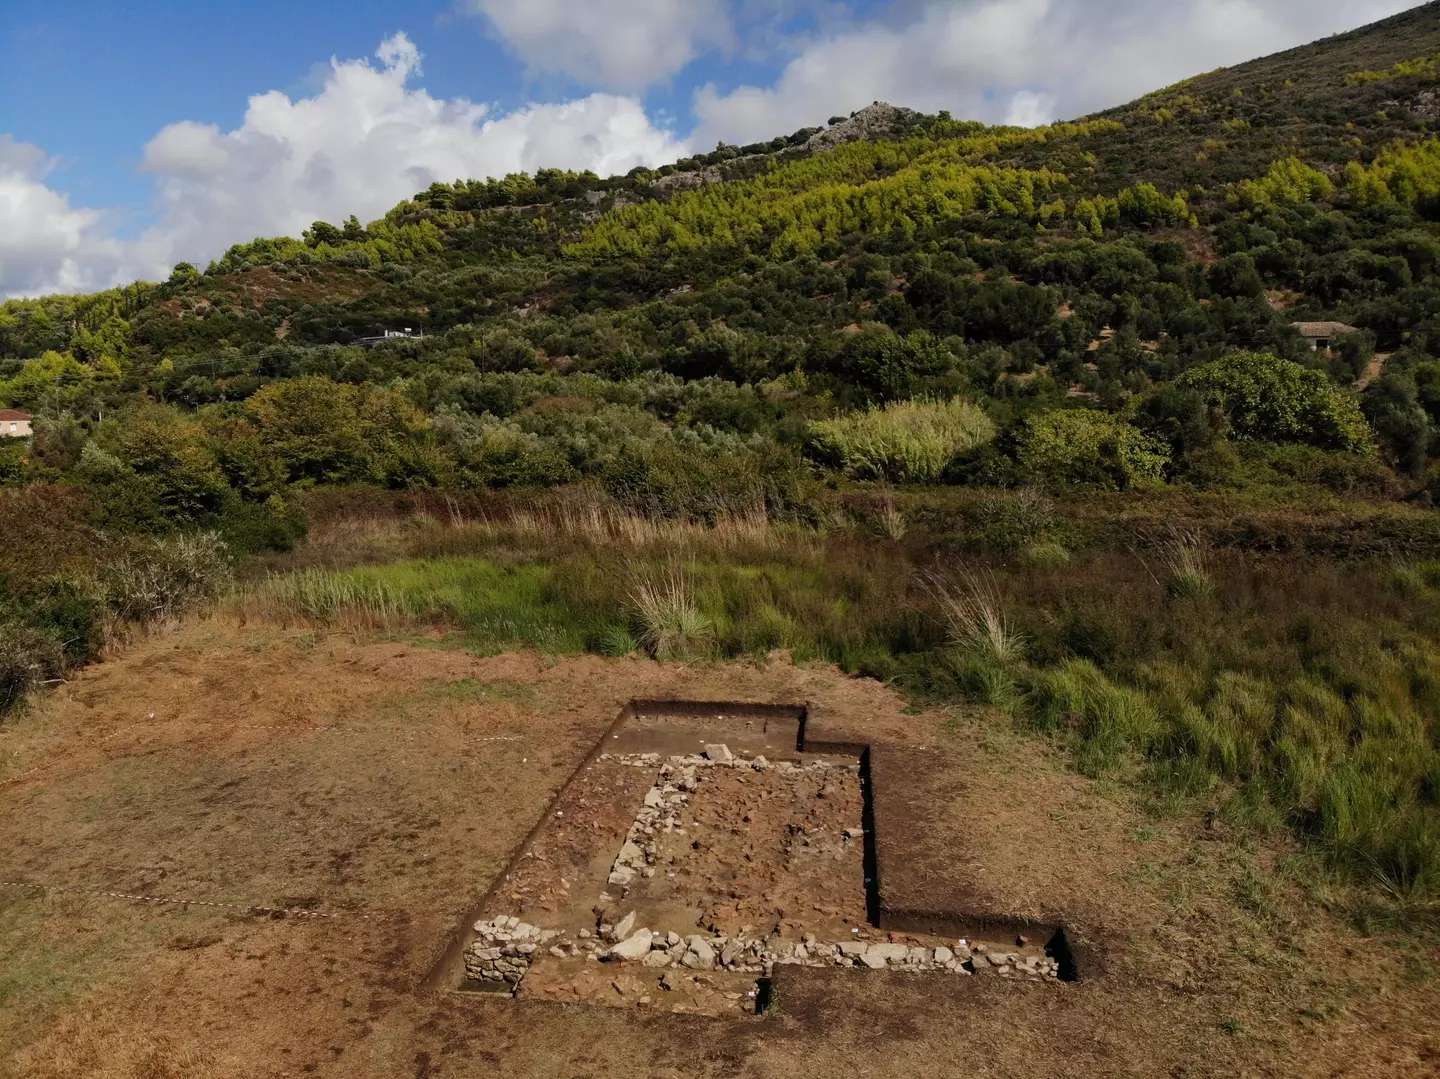 The foundations of a temple to Poseidon were discovered in Greece.